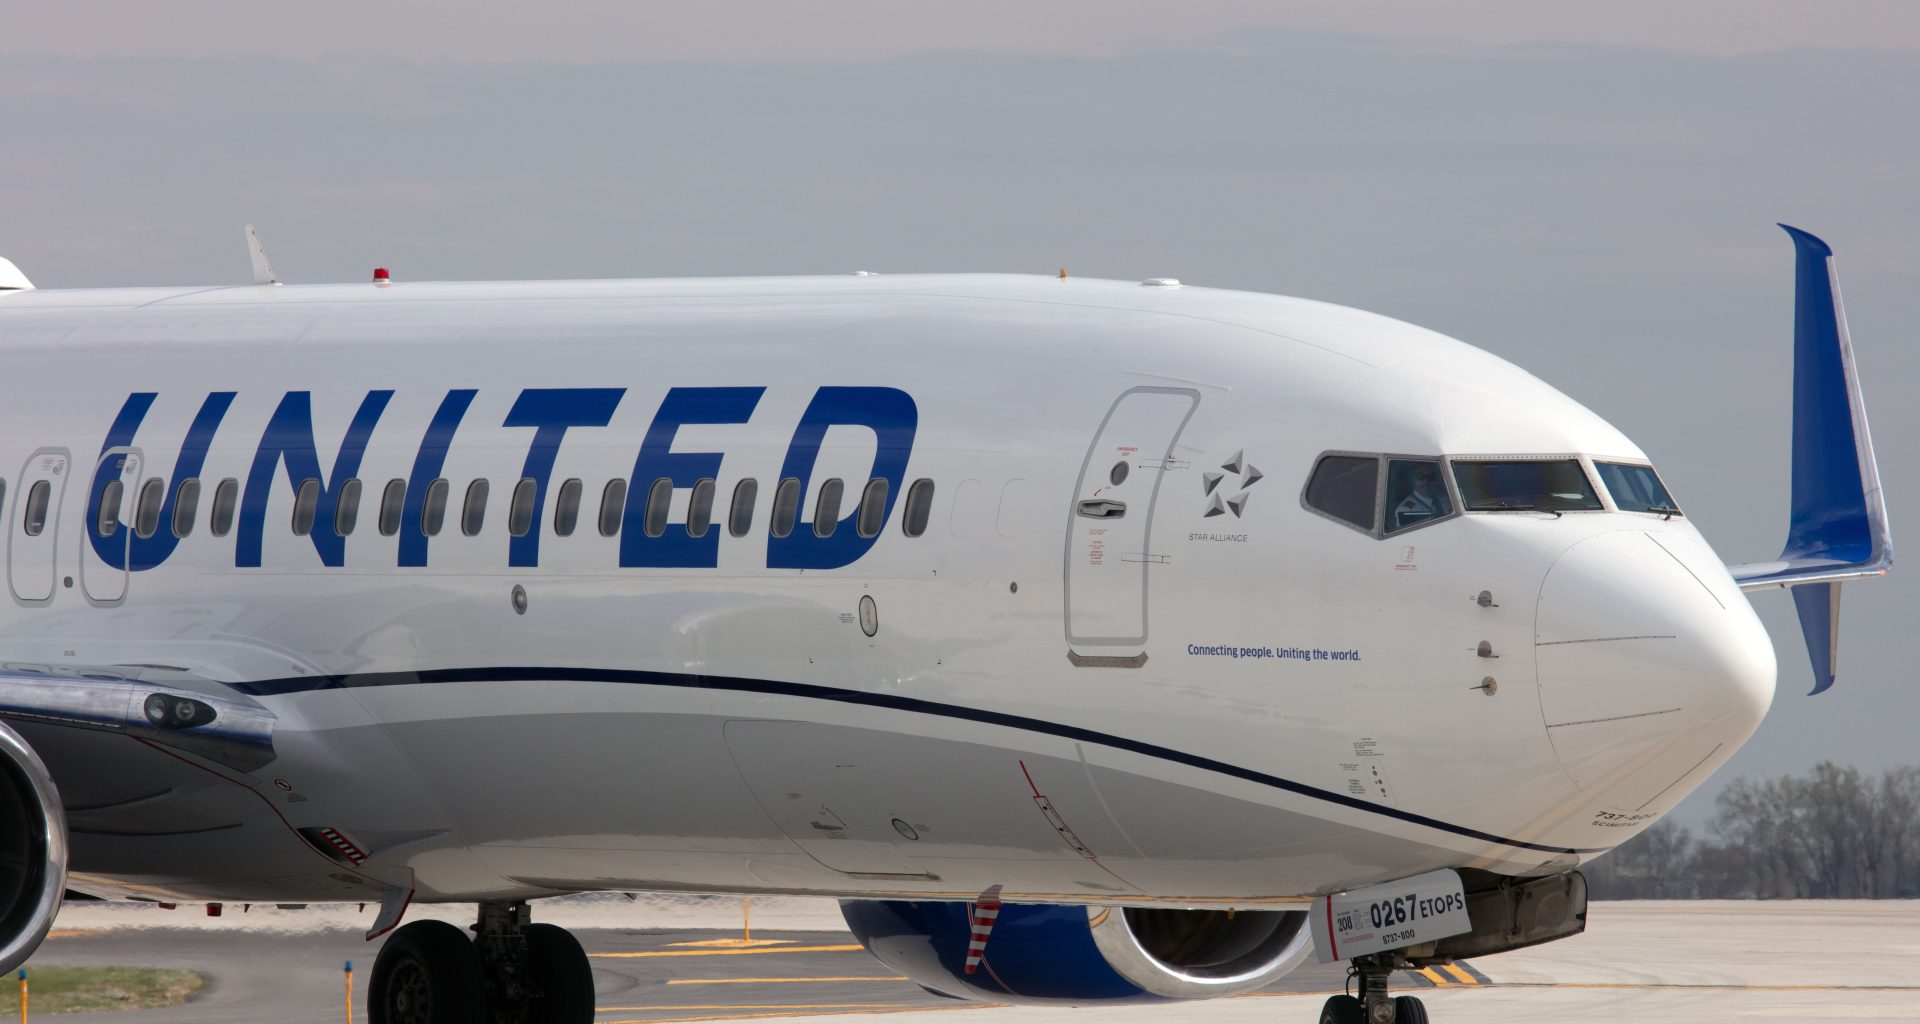 The front section of a United Airlines aircraft exterior as it sits on a runway.